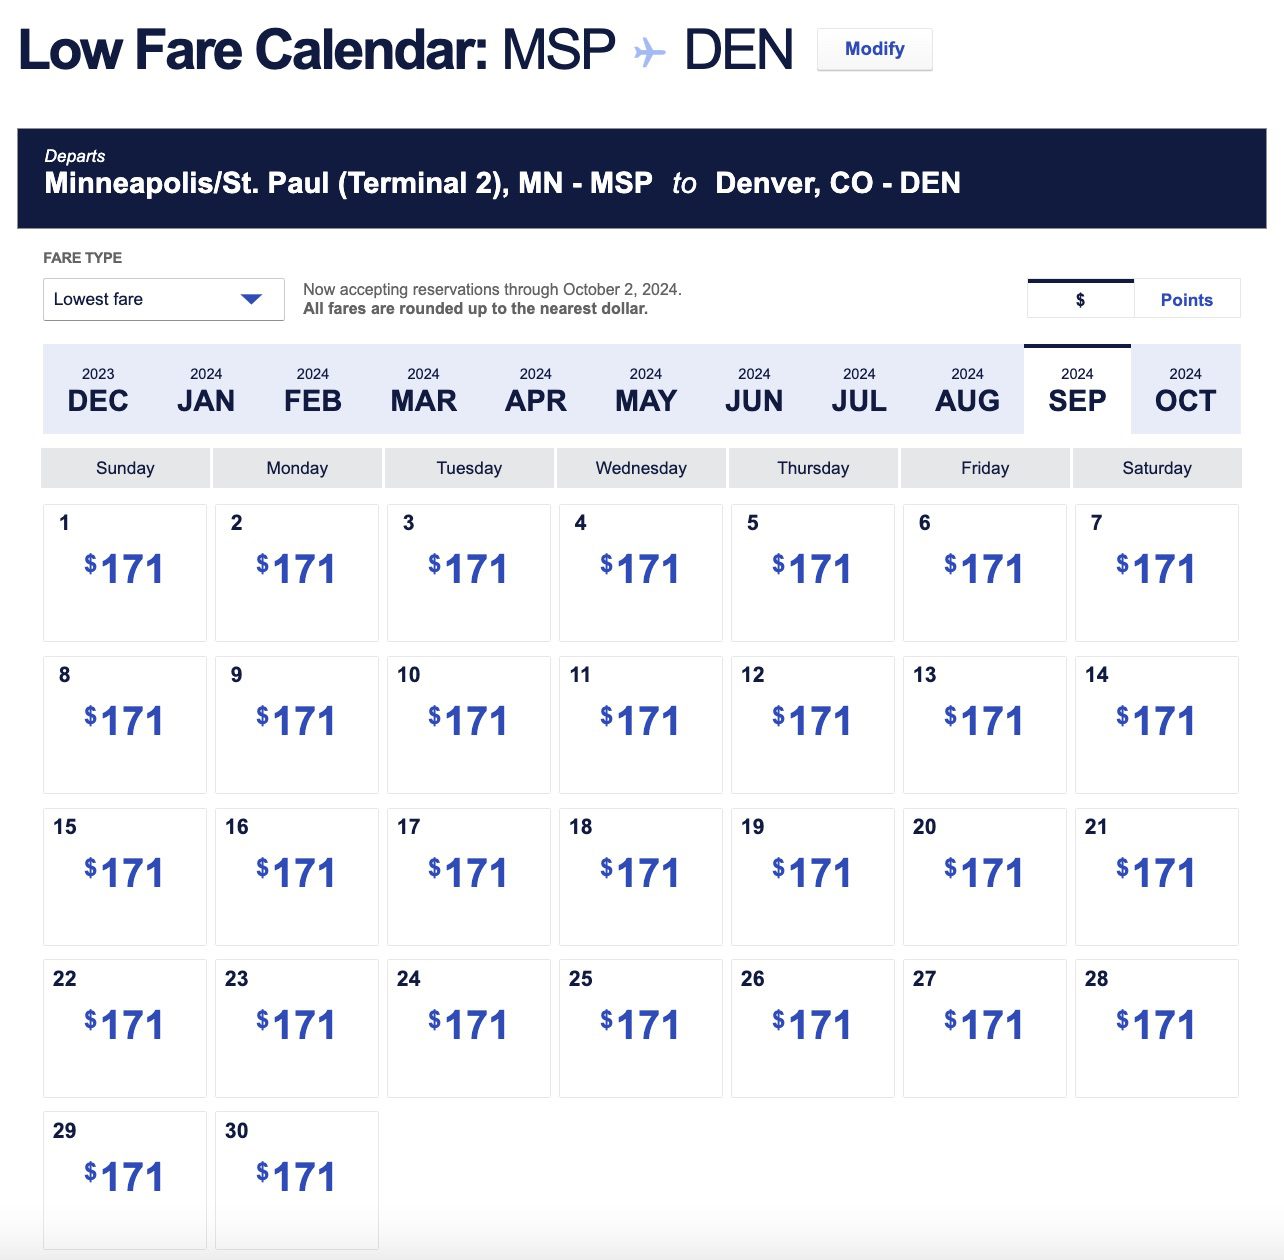 Southwest Flights Are Now Bookable into March 2025